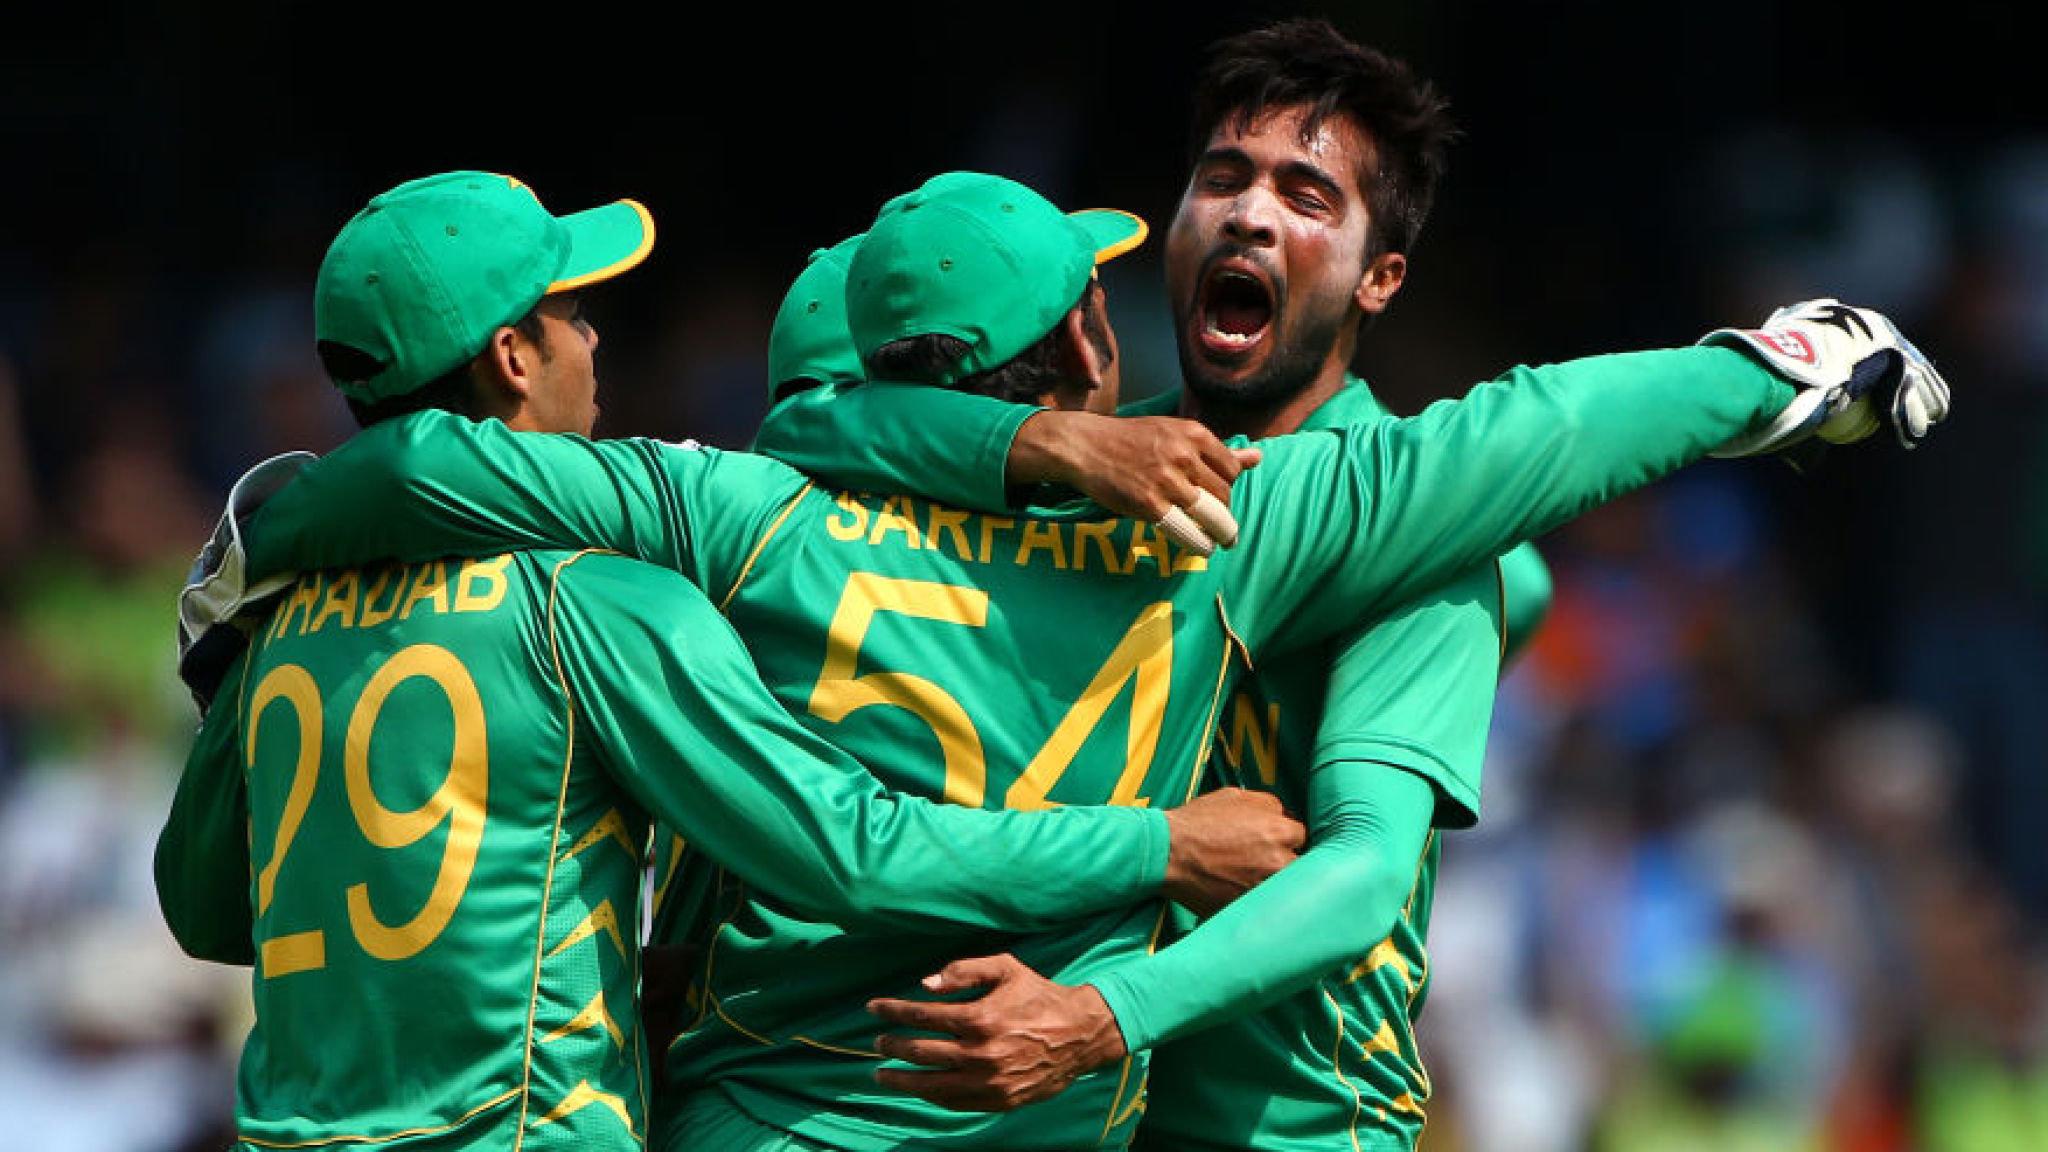 Mohammad Amir reflects on Pakistan's Champions Trophy win. Cricket